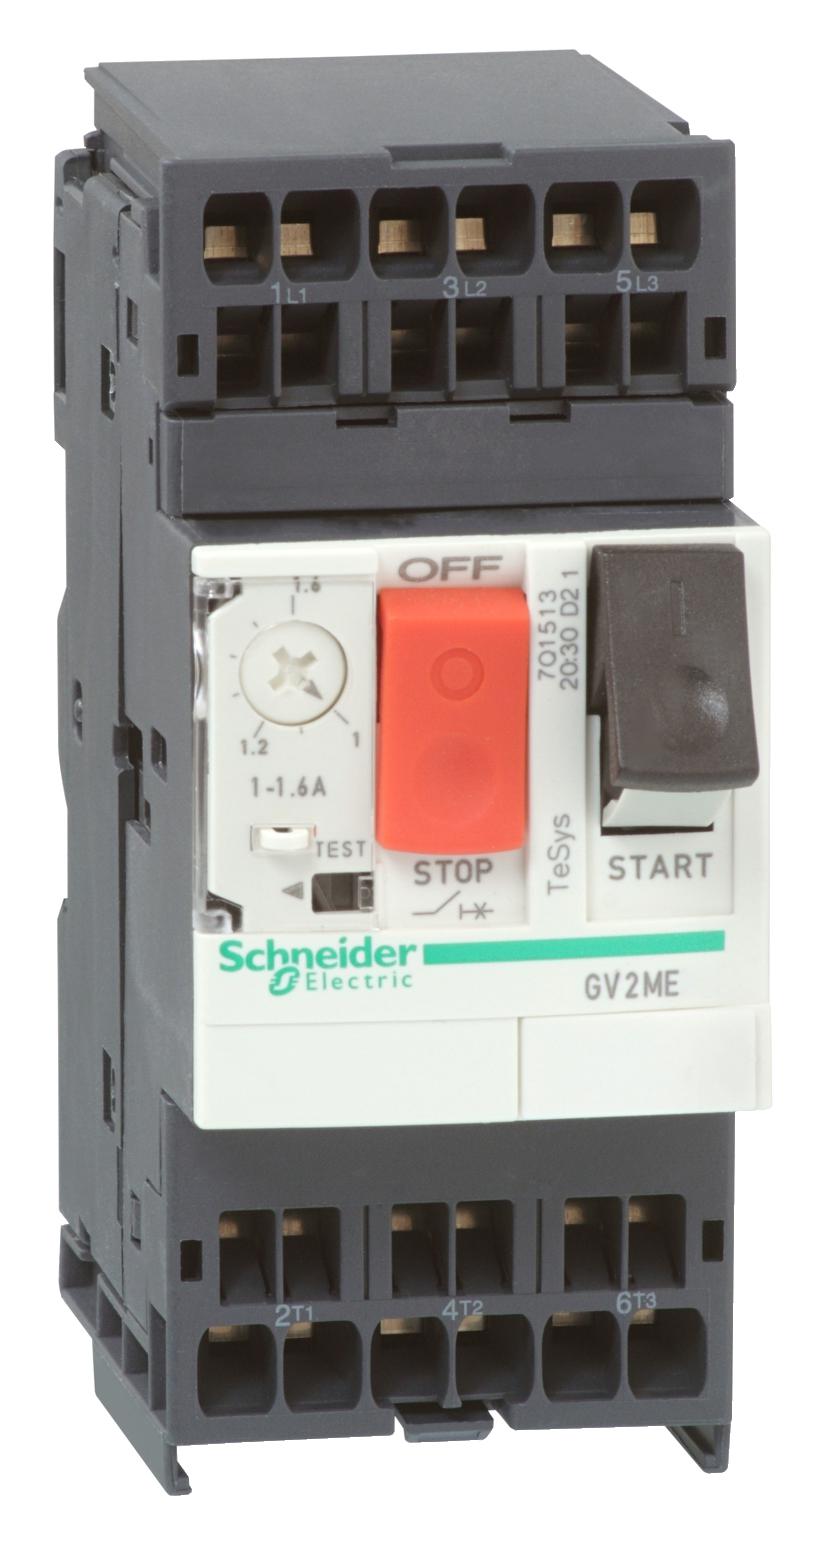 GV2ME053 THERMAL MAGNETIC CIRCUIT BREAKER SCHNEIDER ELECTRIC